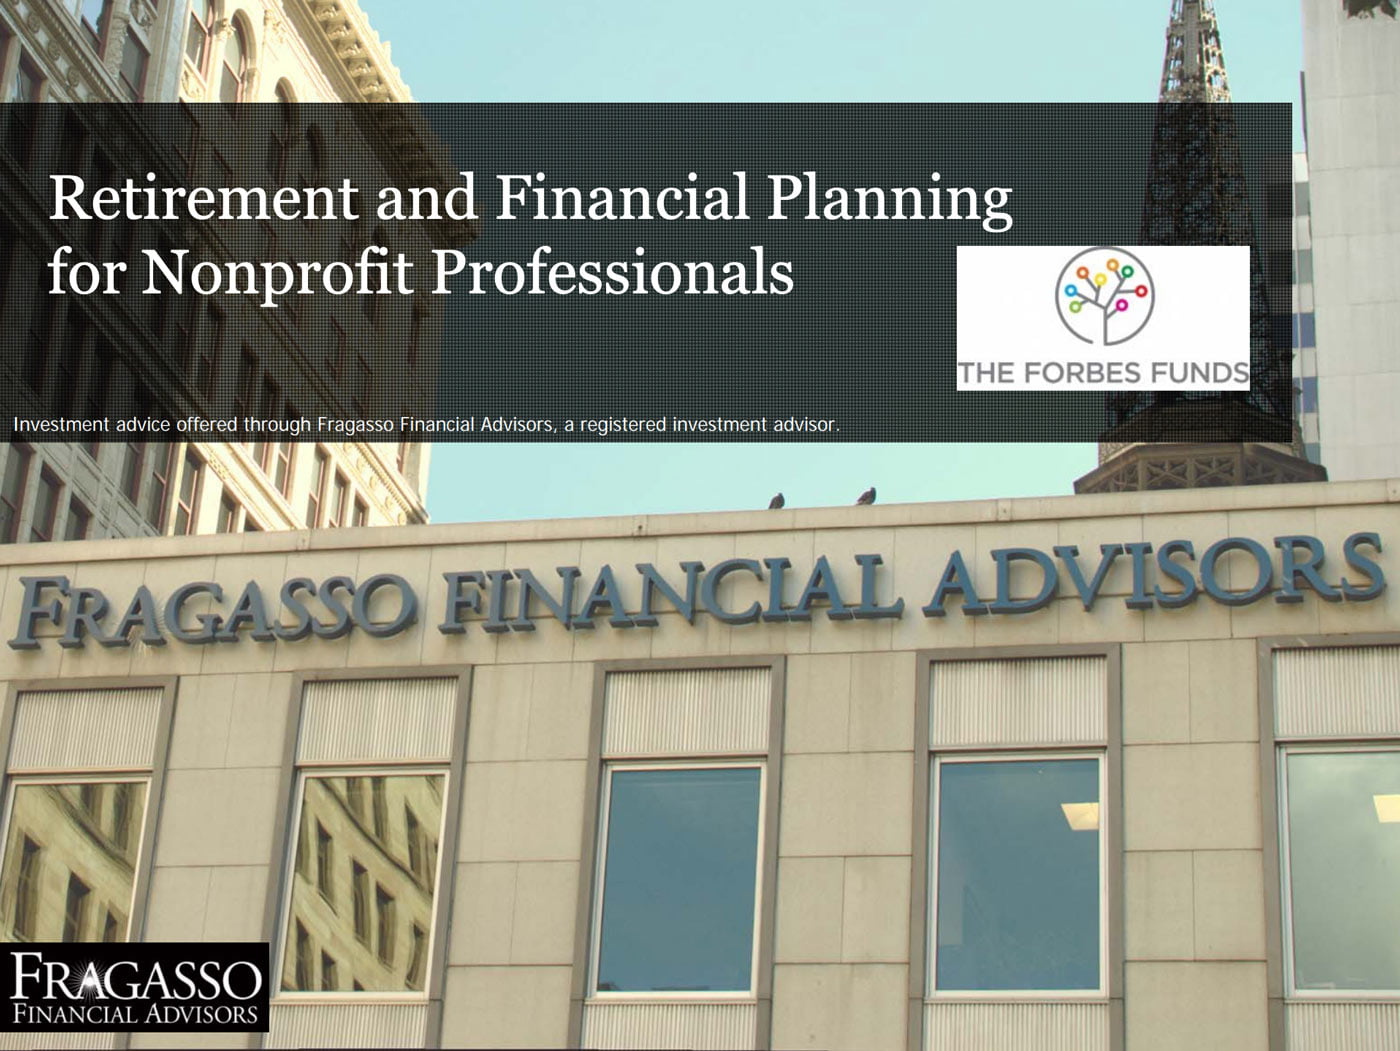 Financial Planning and Retirement for Nonprofit Professionals